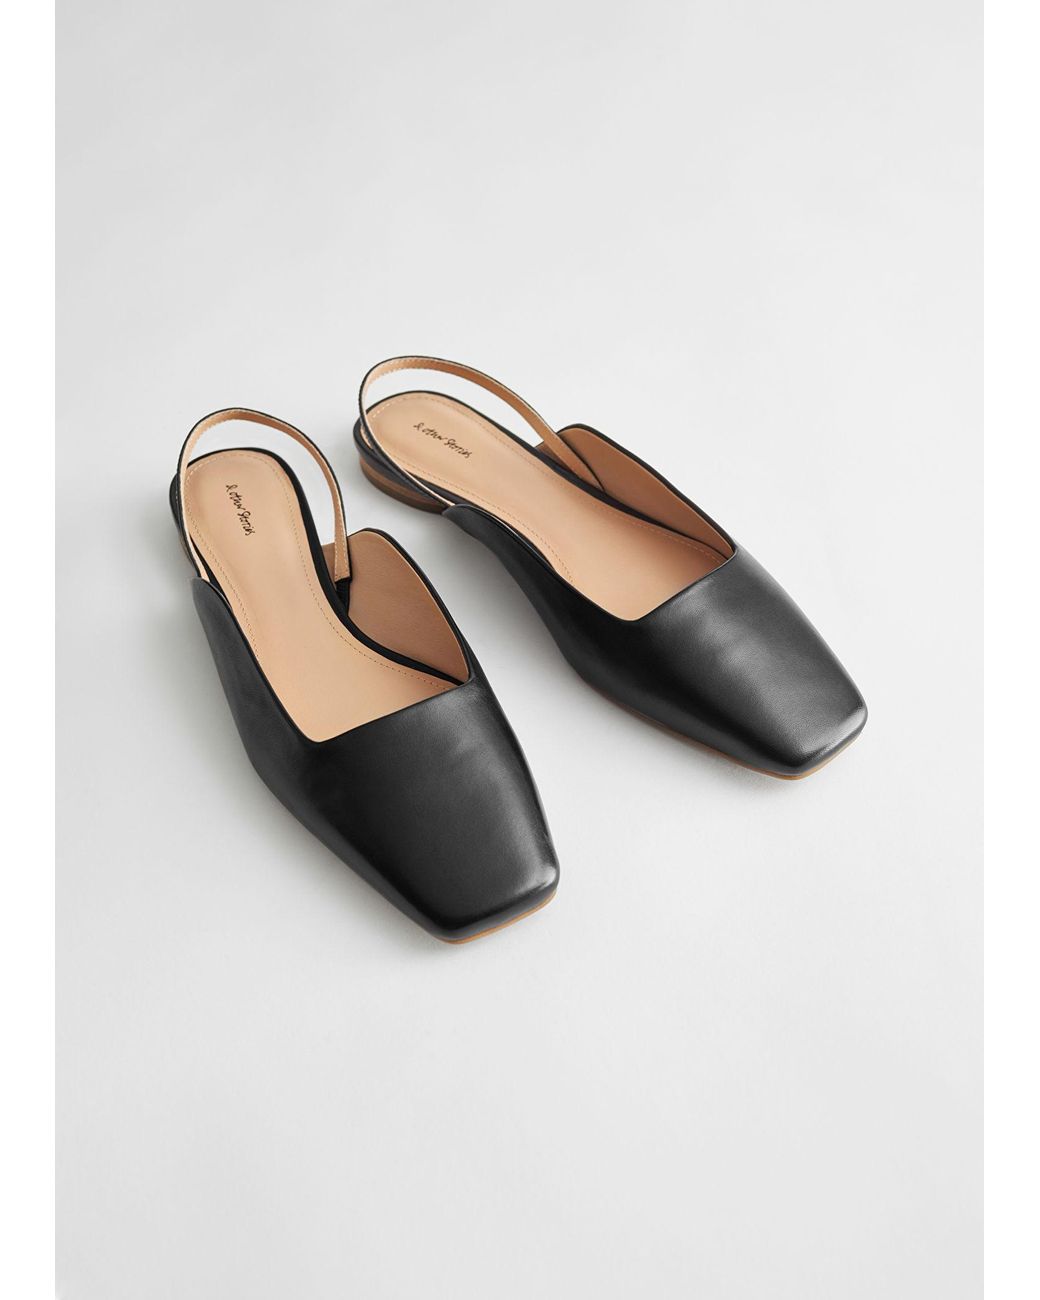 & Other Stories Leather Square Toe Ballerina Flats in Black | Lyst UK